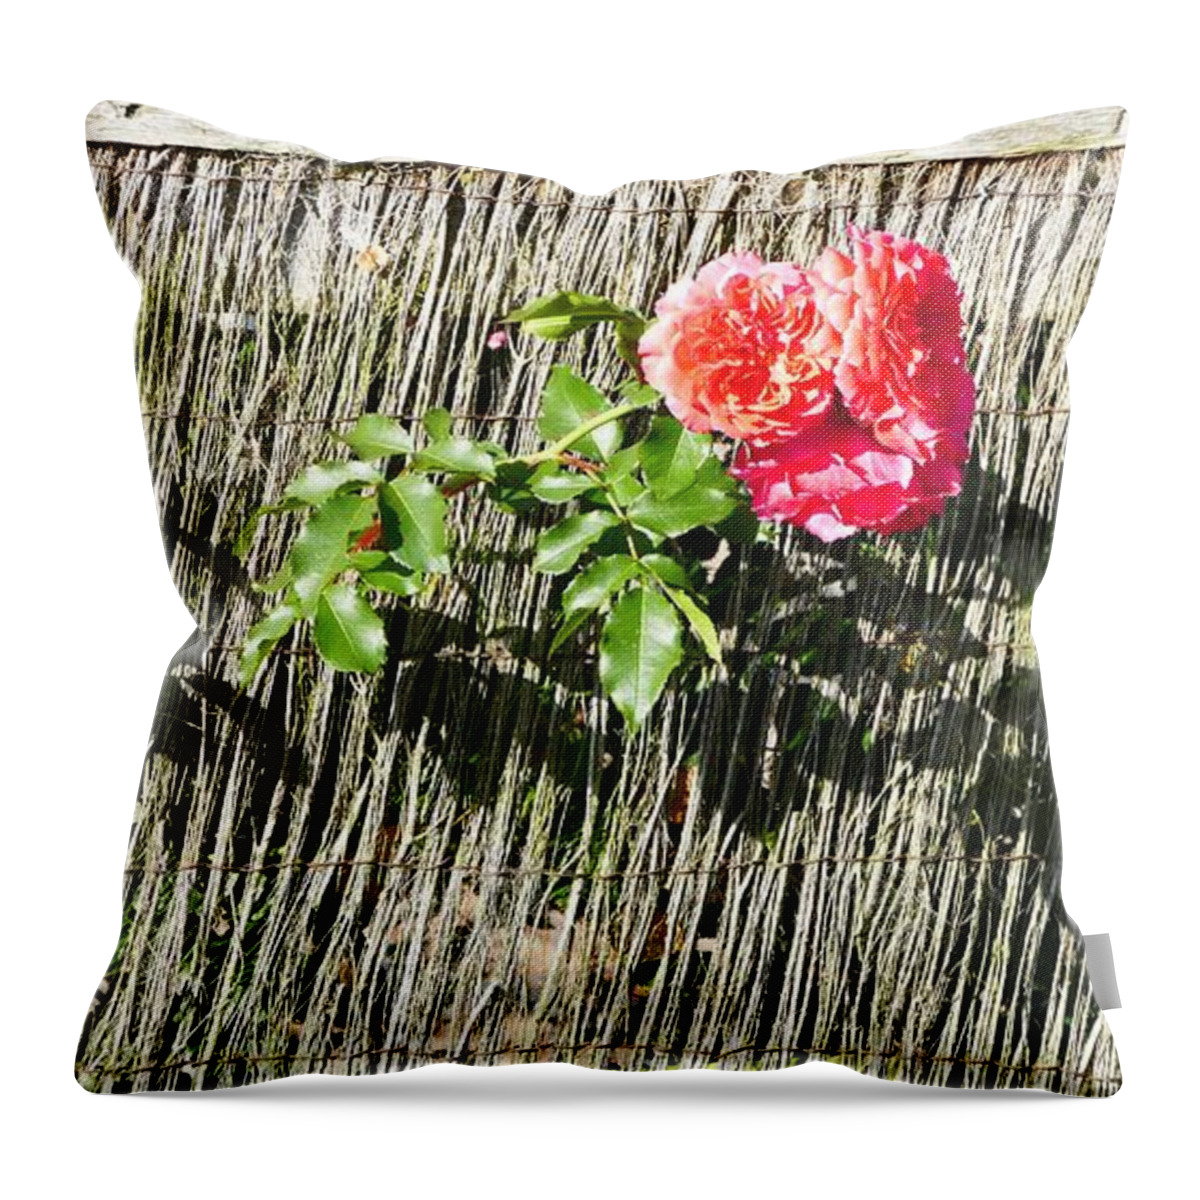 Rose Throw Pillow featuring the photograph Floral Escape by Ivana Westin